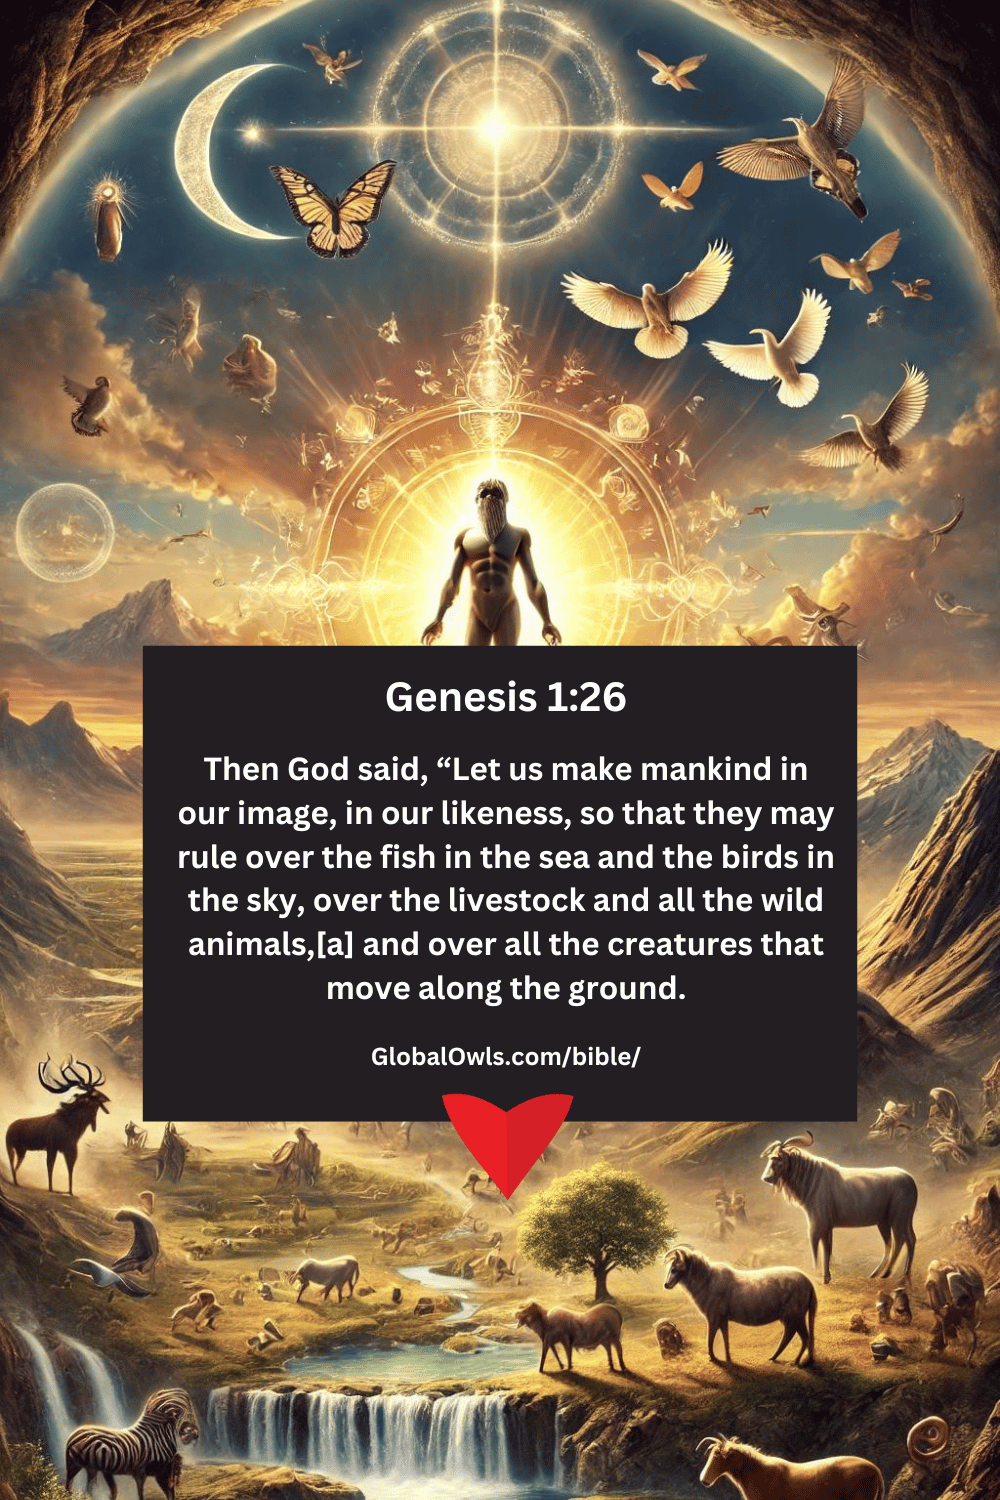 Genesis 1-26 Then God said, “Let us make mankind in our image, in our likeness, so that they may rule over the fish in the sea and the birds in the sky, over the livestock and all the wild animals